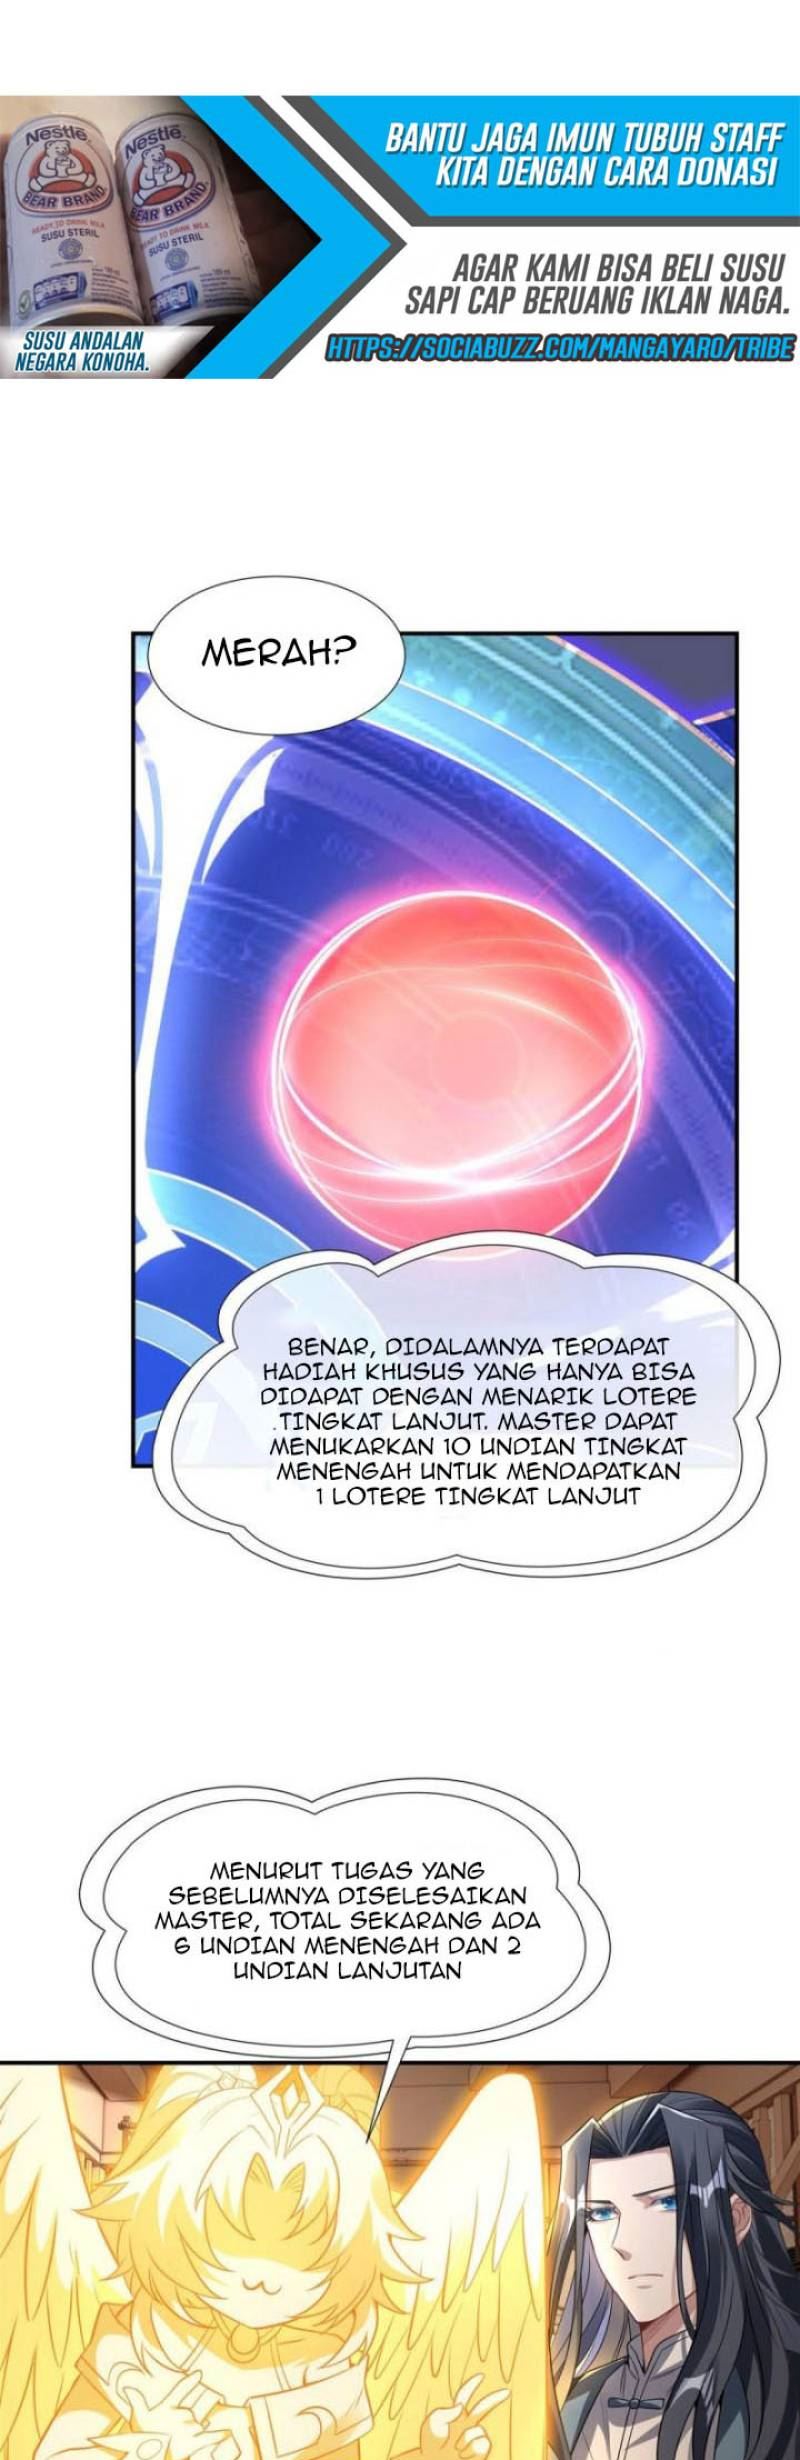 Dilarang COPAS - situs resmi www.mangacanblog.com - Komik my female apprentices are all big shots from the future 082 - chapter 82 83 Indonesia my female apprentices are all big shots from the future 082 - chapter 82 Terbaru 21|Baca Manga Komik Indonesia|Mangacan